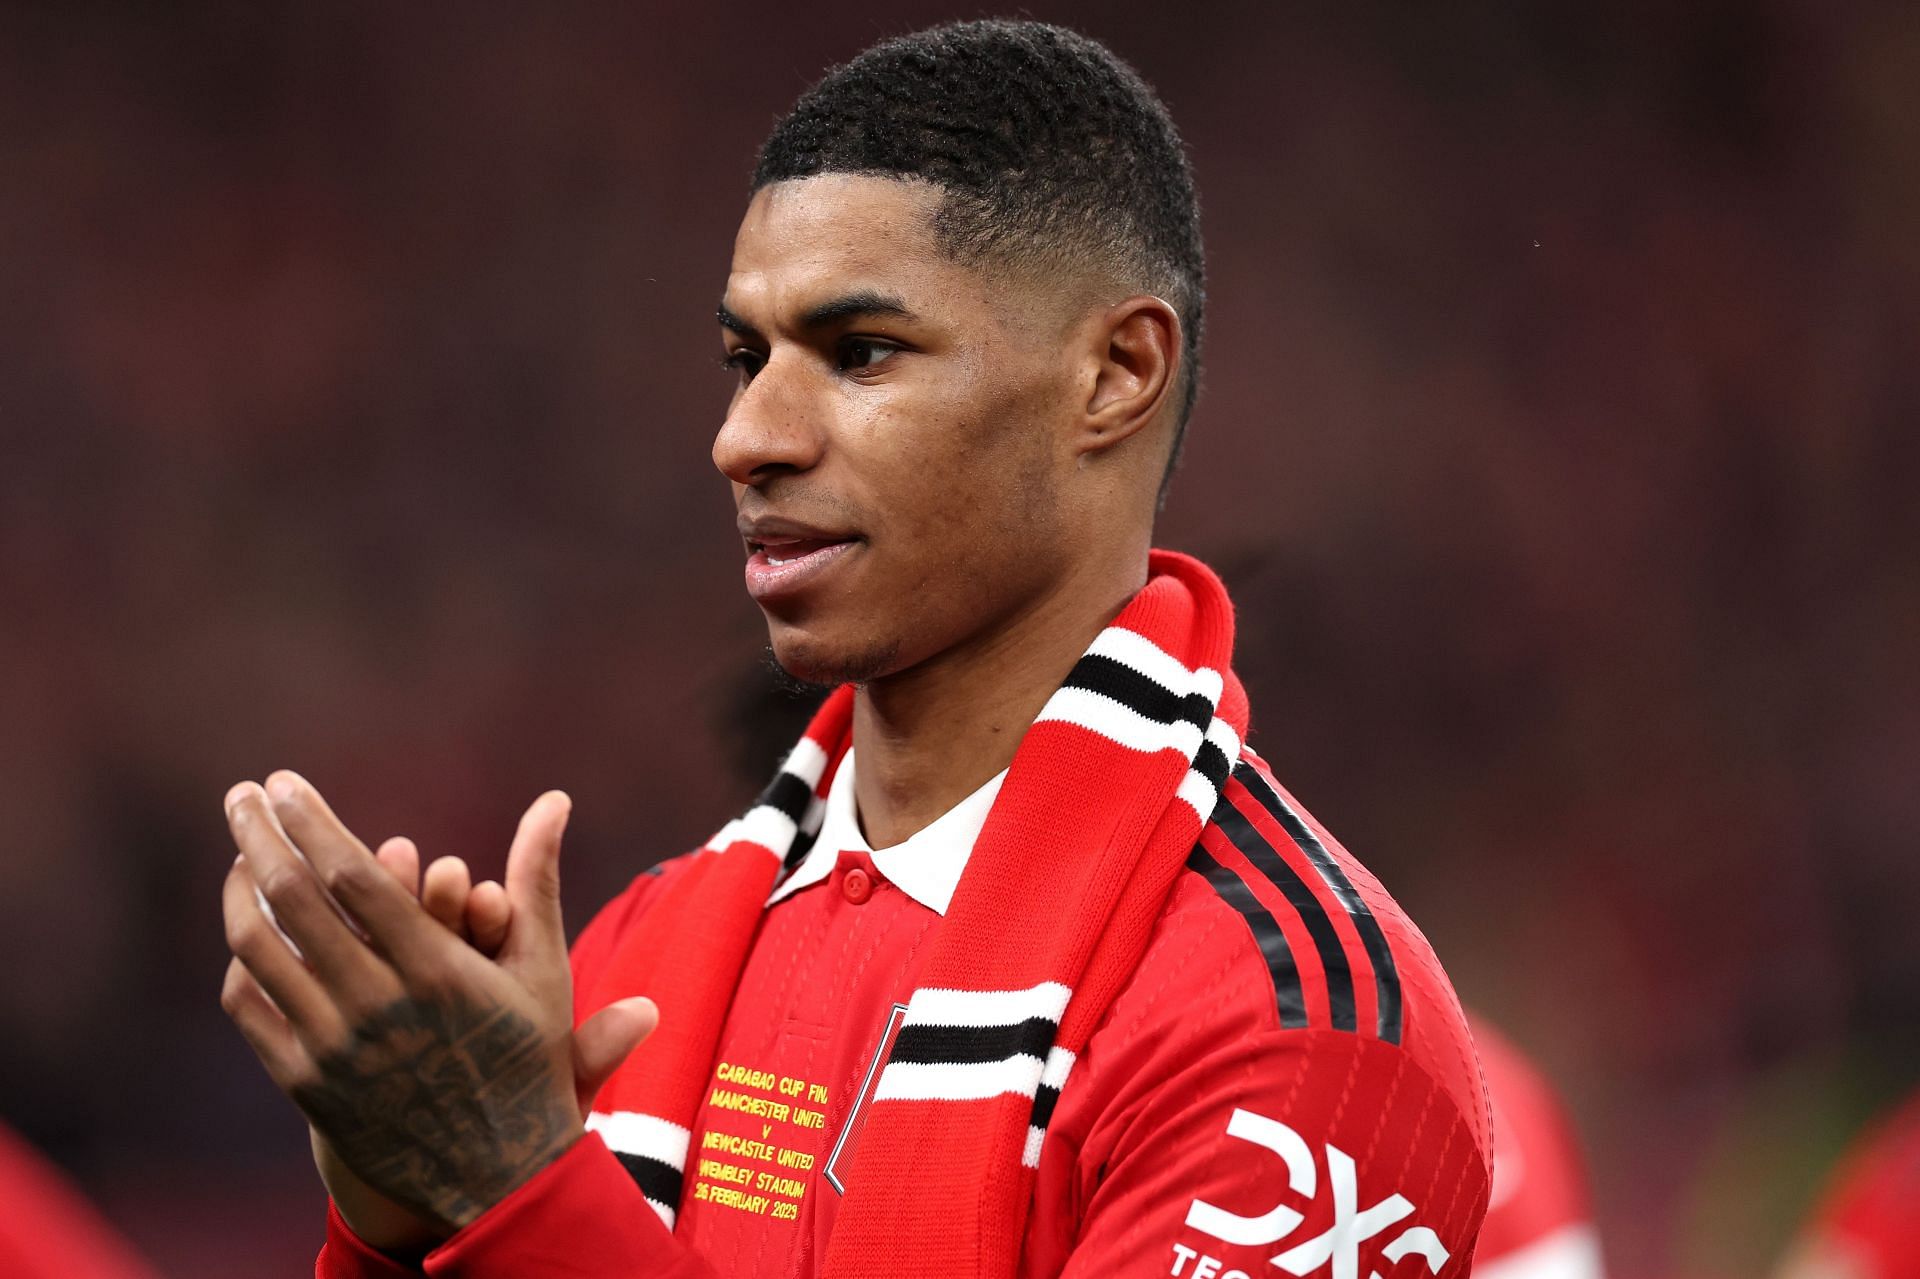 Marcus Rashford is said to operate best off the left.